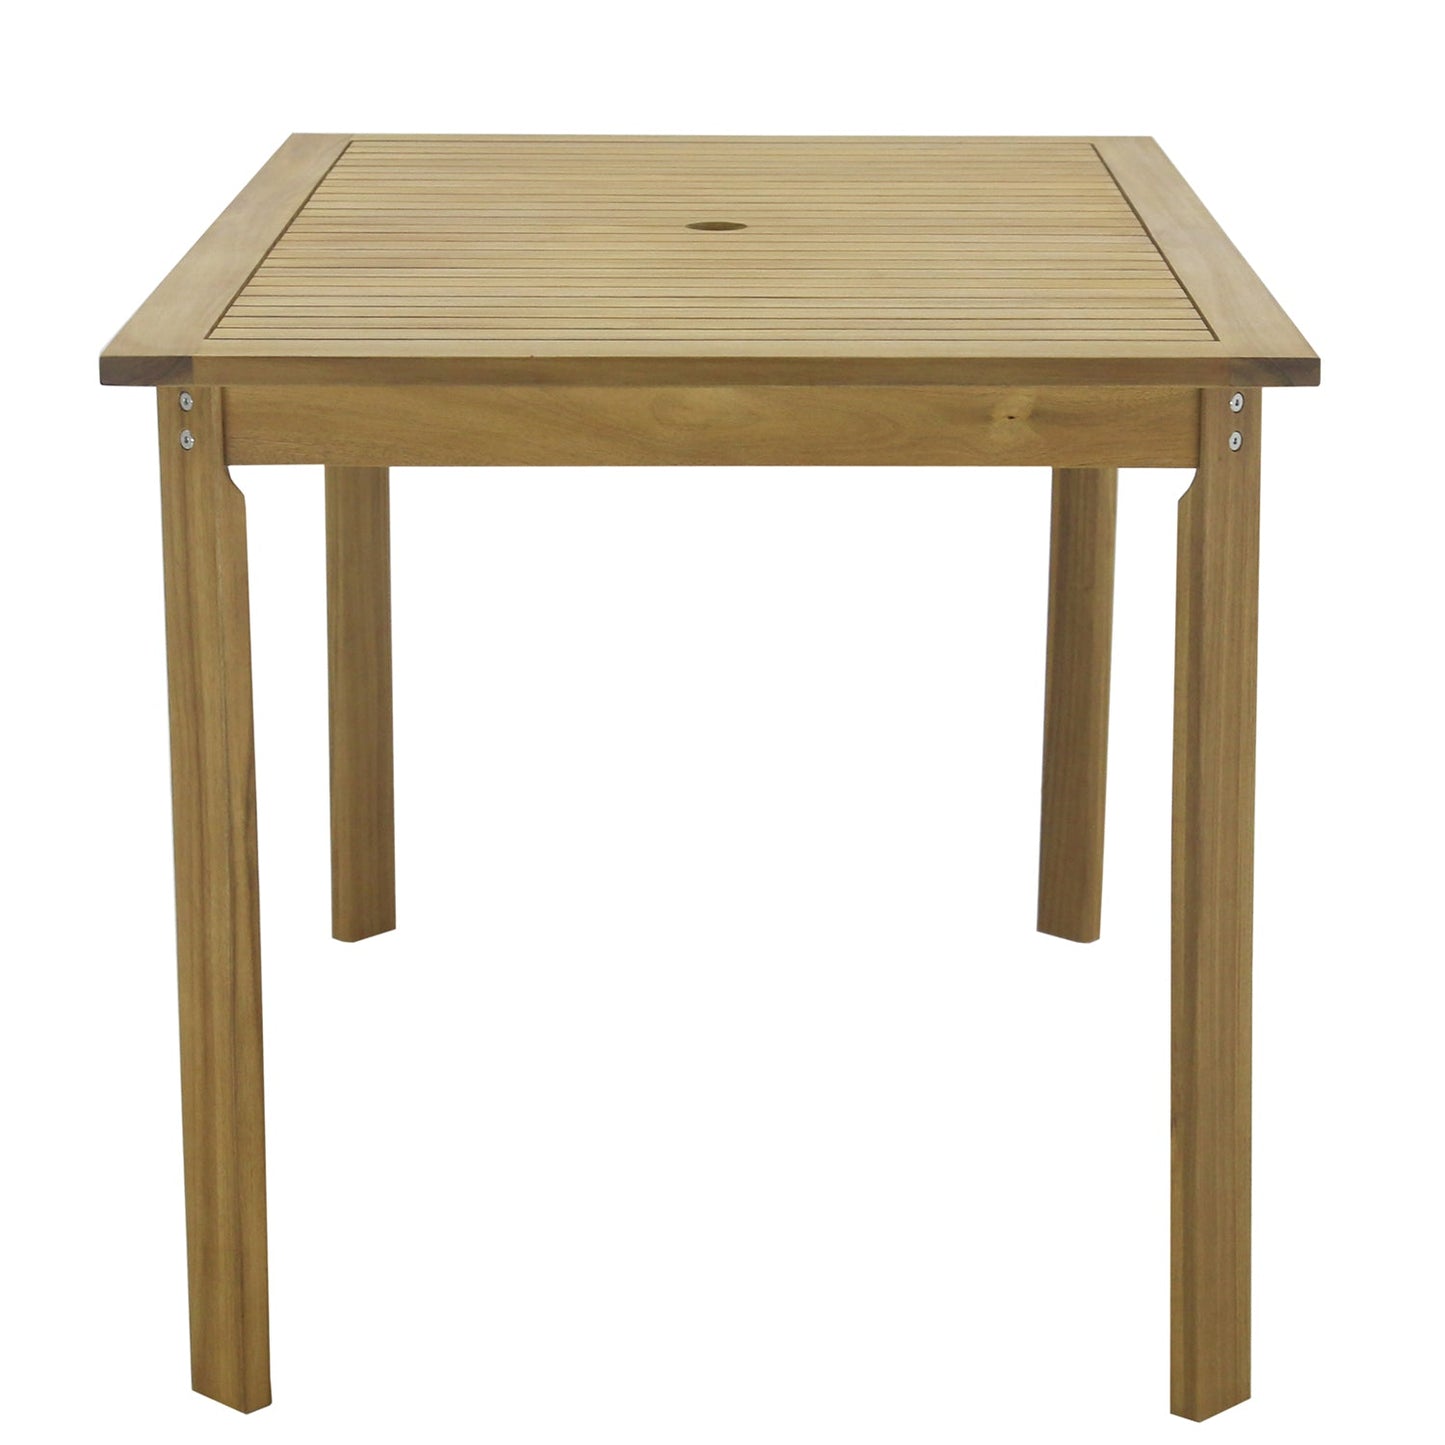 Ackley garden dining table - 6 seater - solid acacia wood